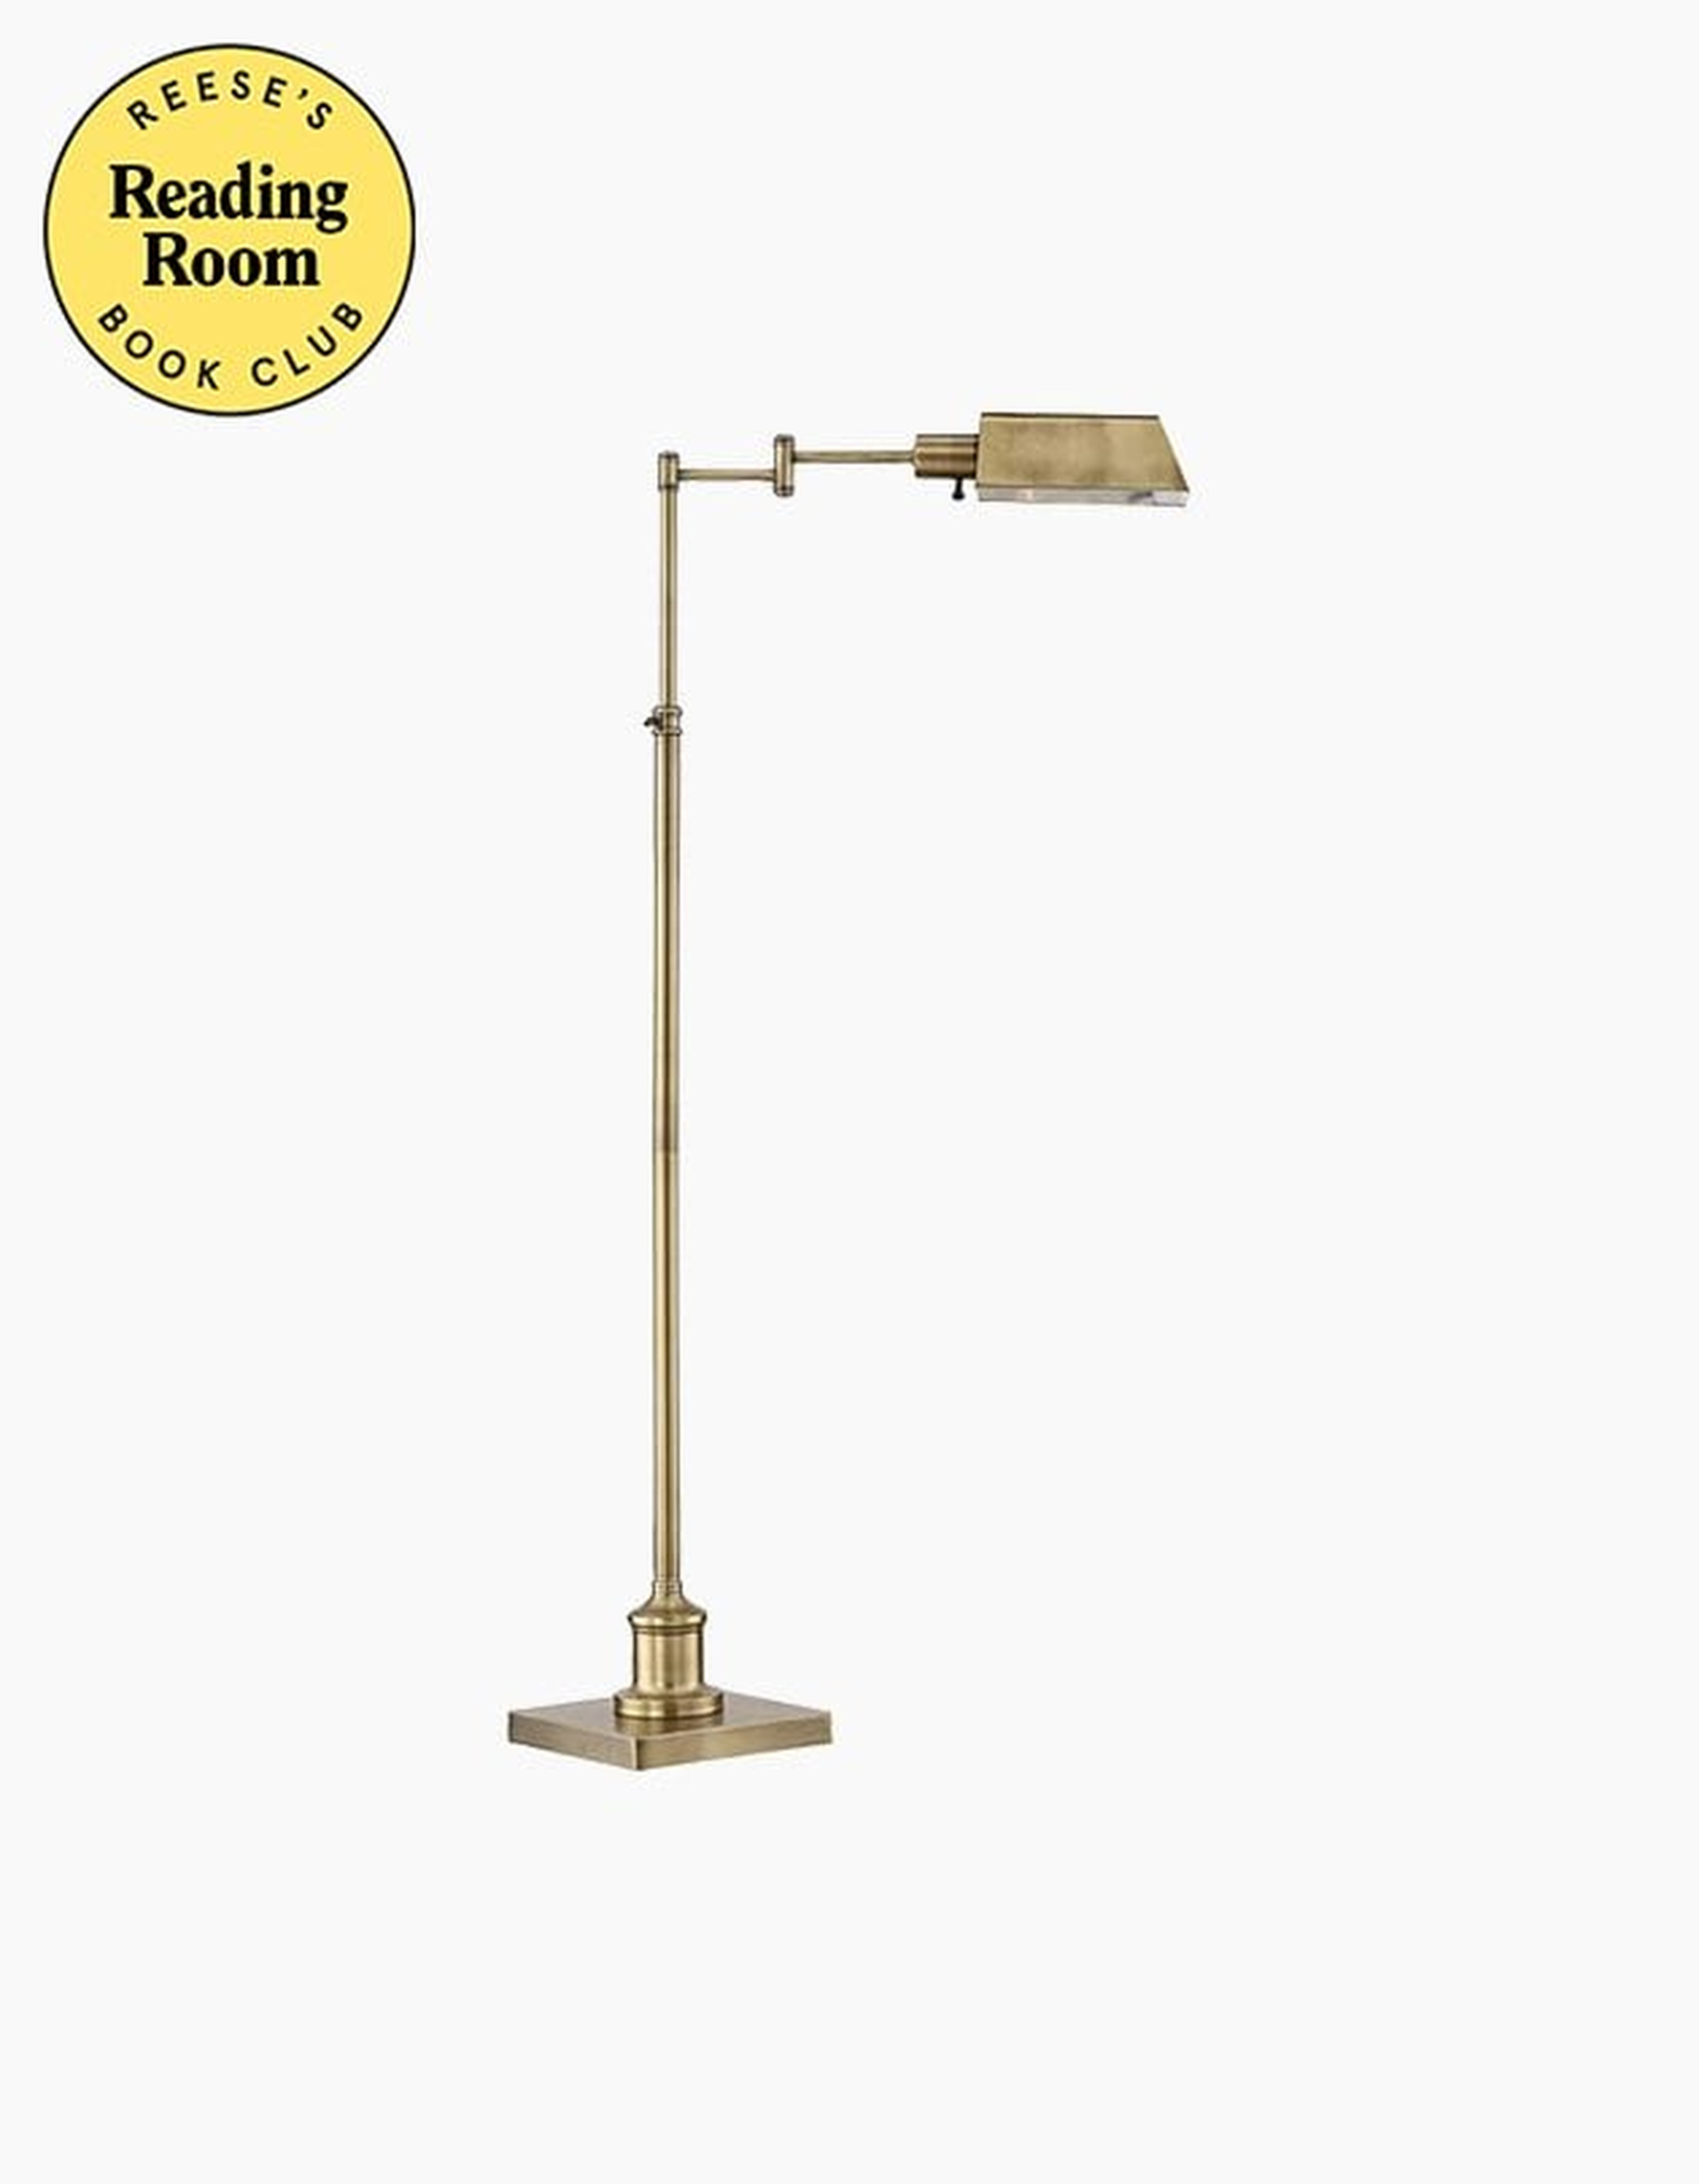 Highlight Task Lamp - Aged Brass - Reese's Book Club x Havenly